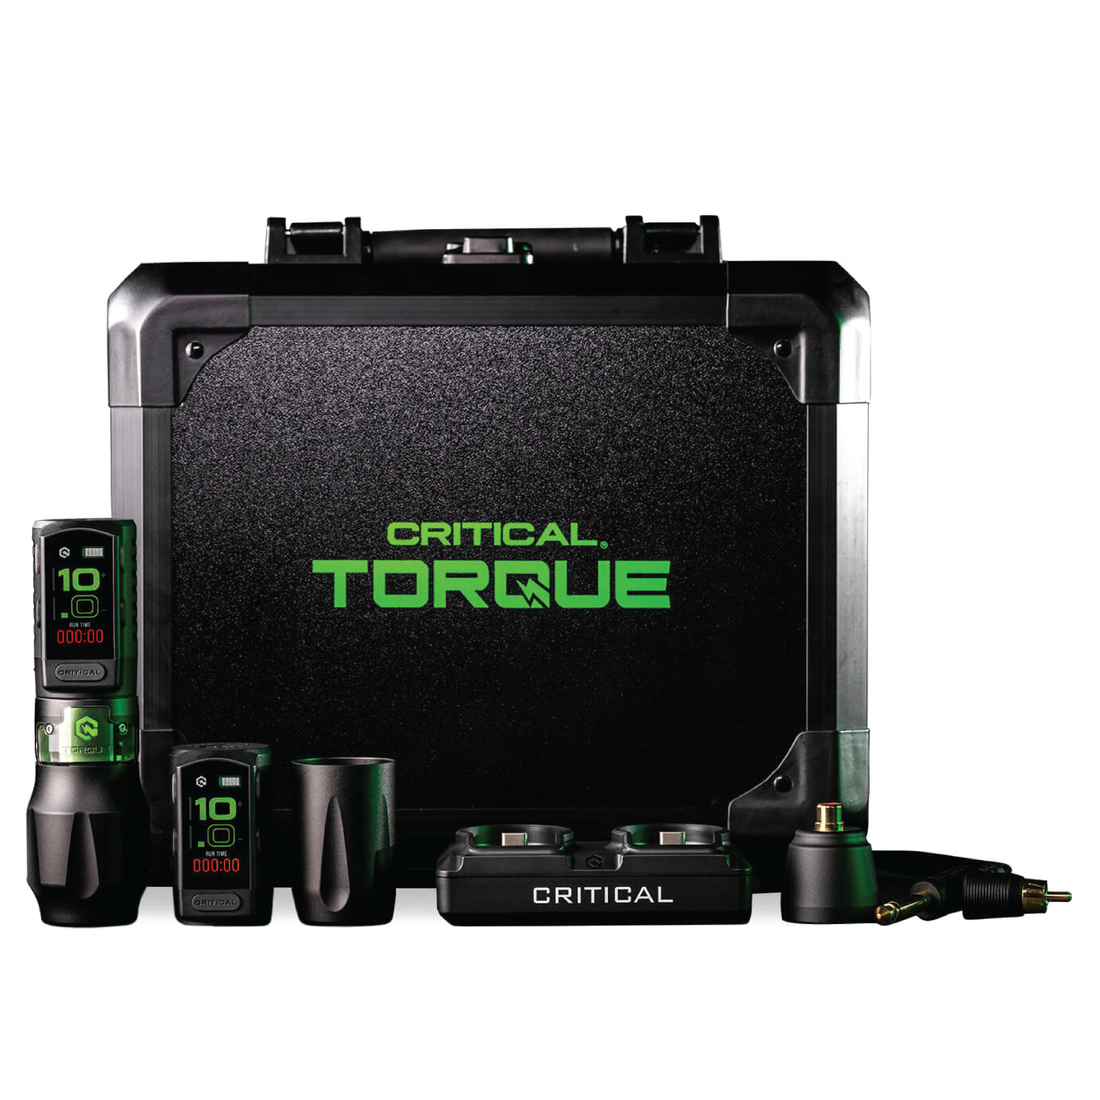 Critical Torque Pen Tattoo Machine (Does not qualify for Year End Sale)